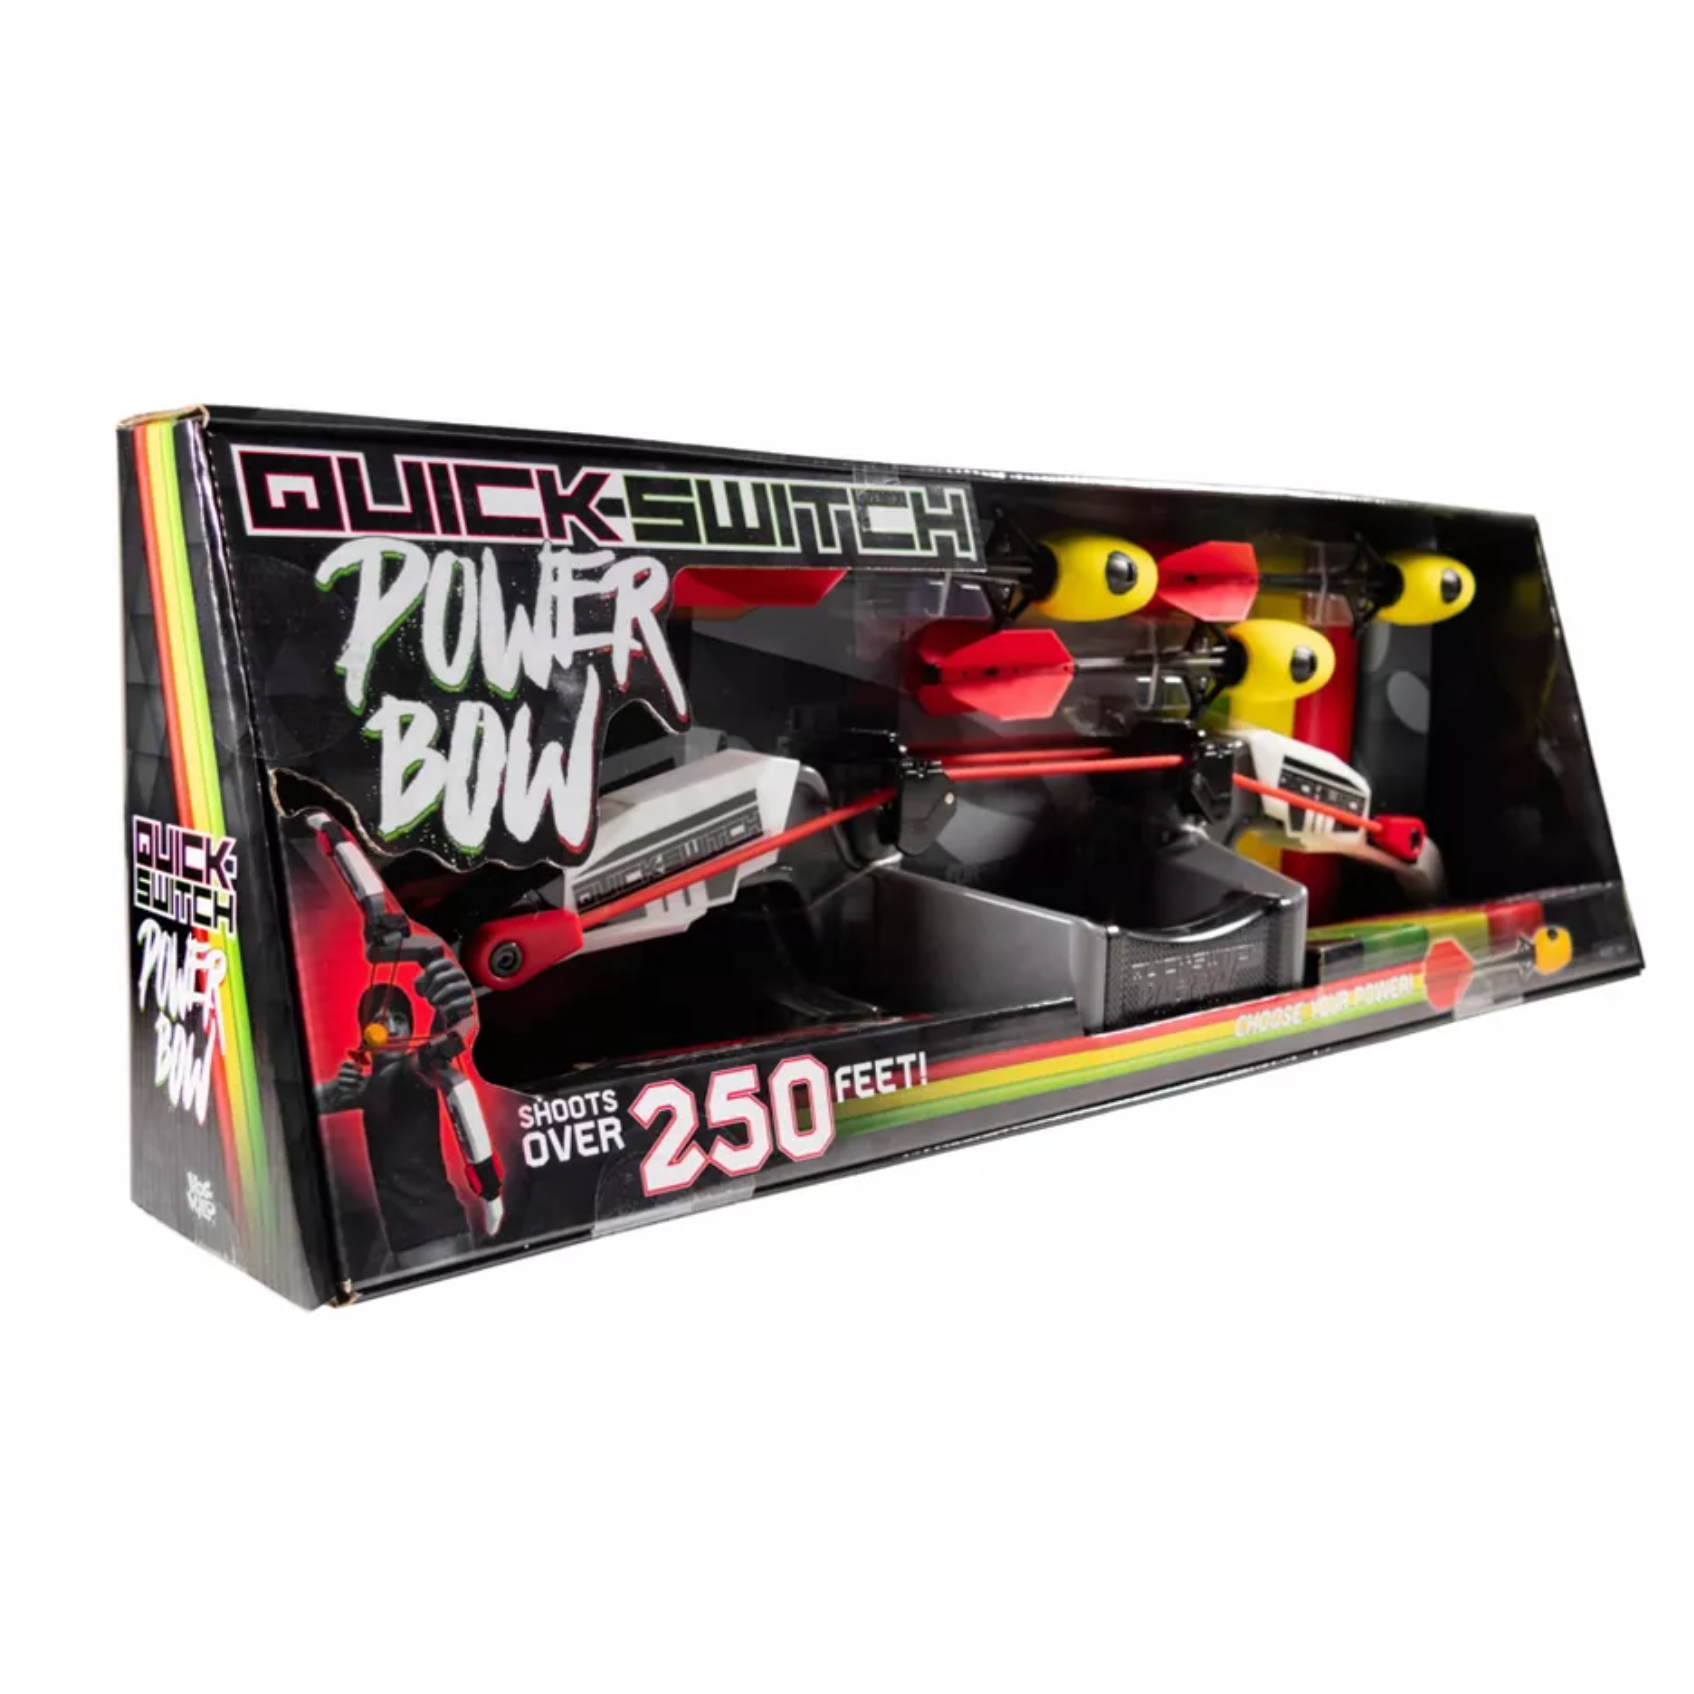 Quick Switch Power Bow